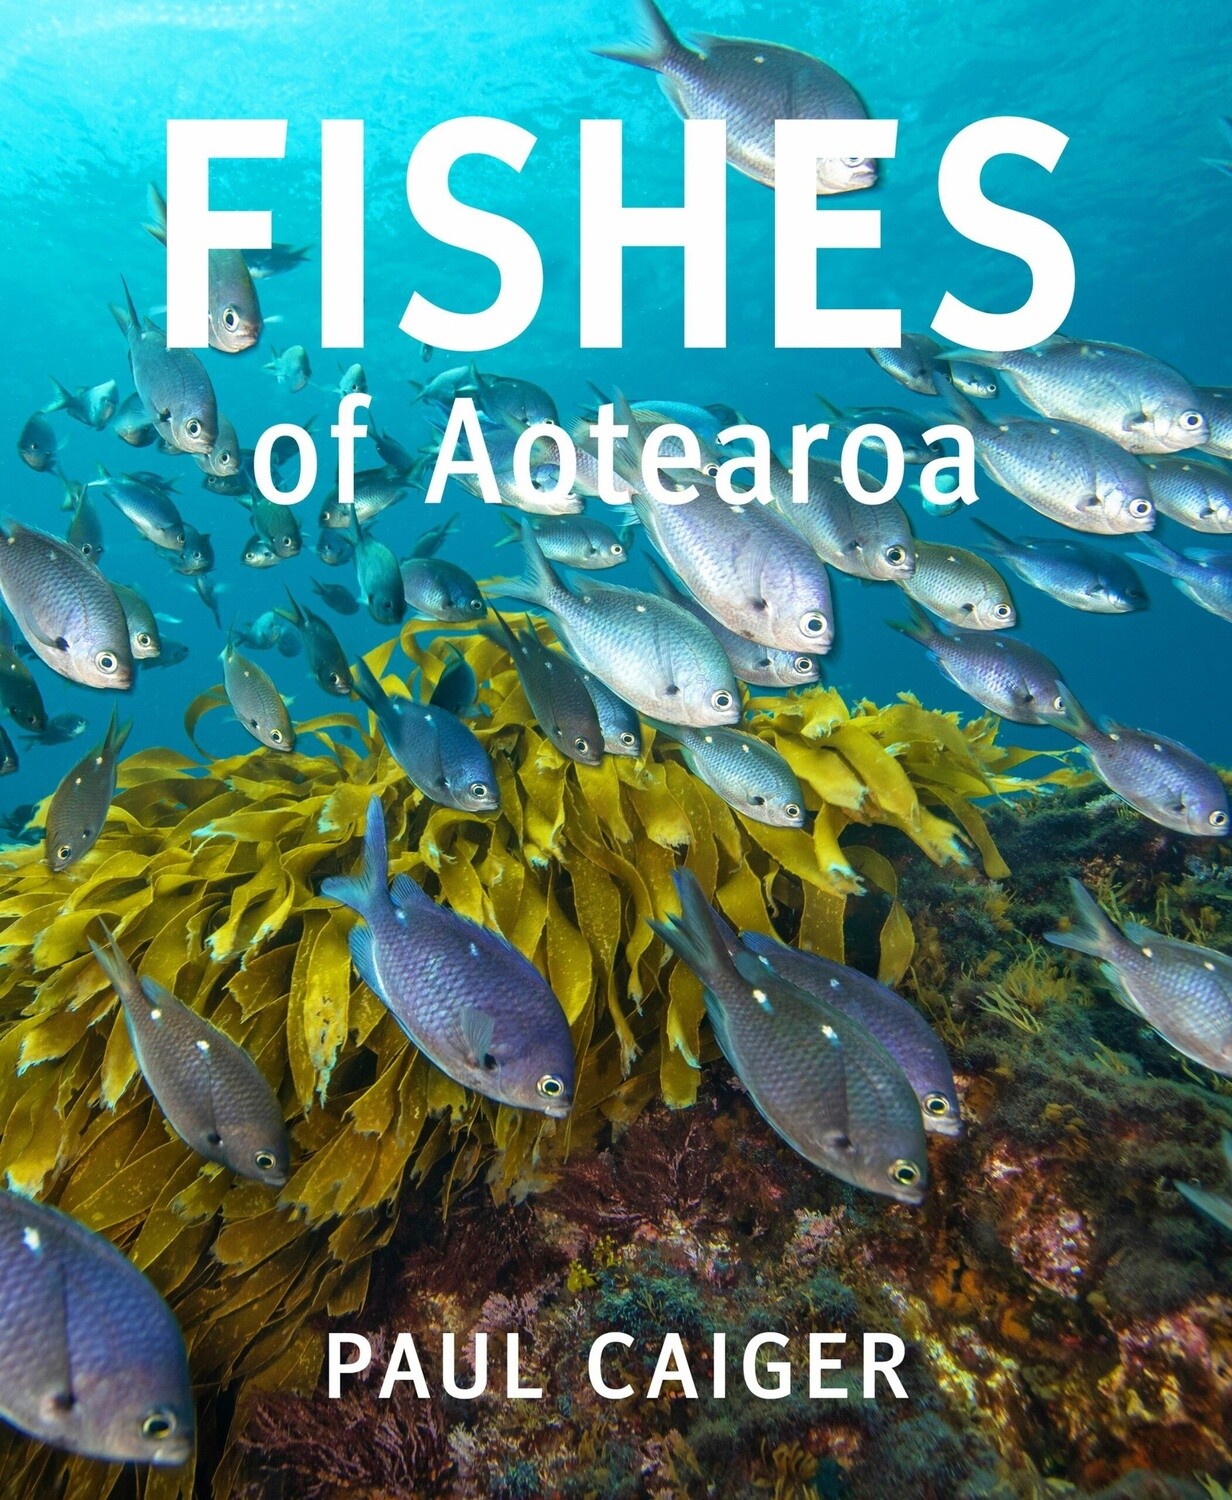 Fishes of Aotearoa New Zealand by Paul Caiger